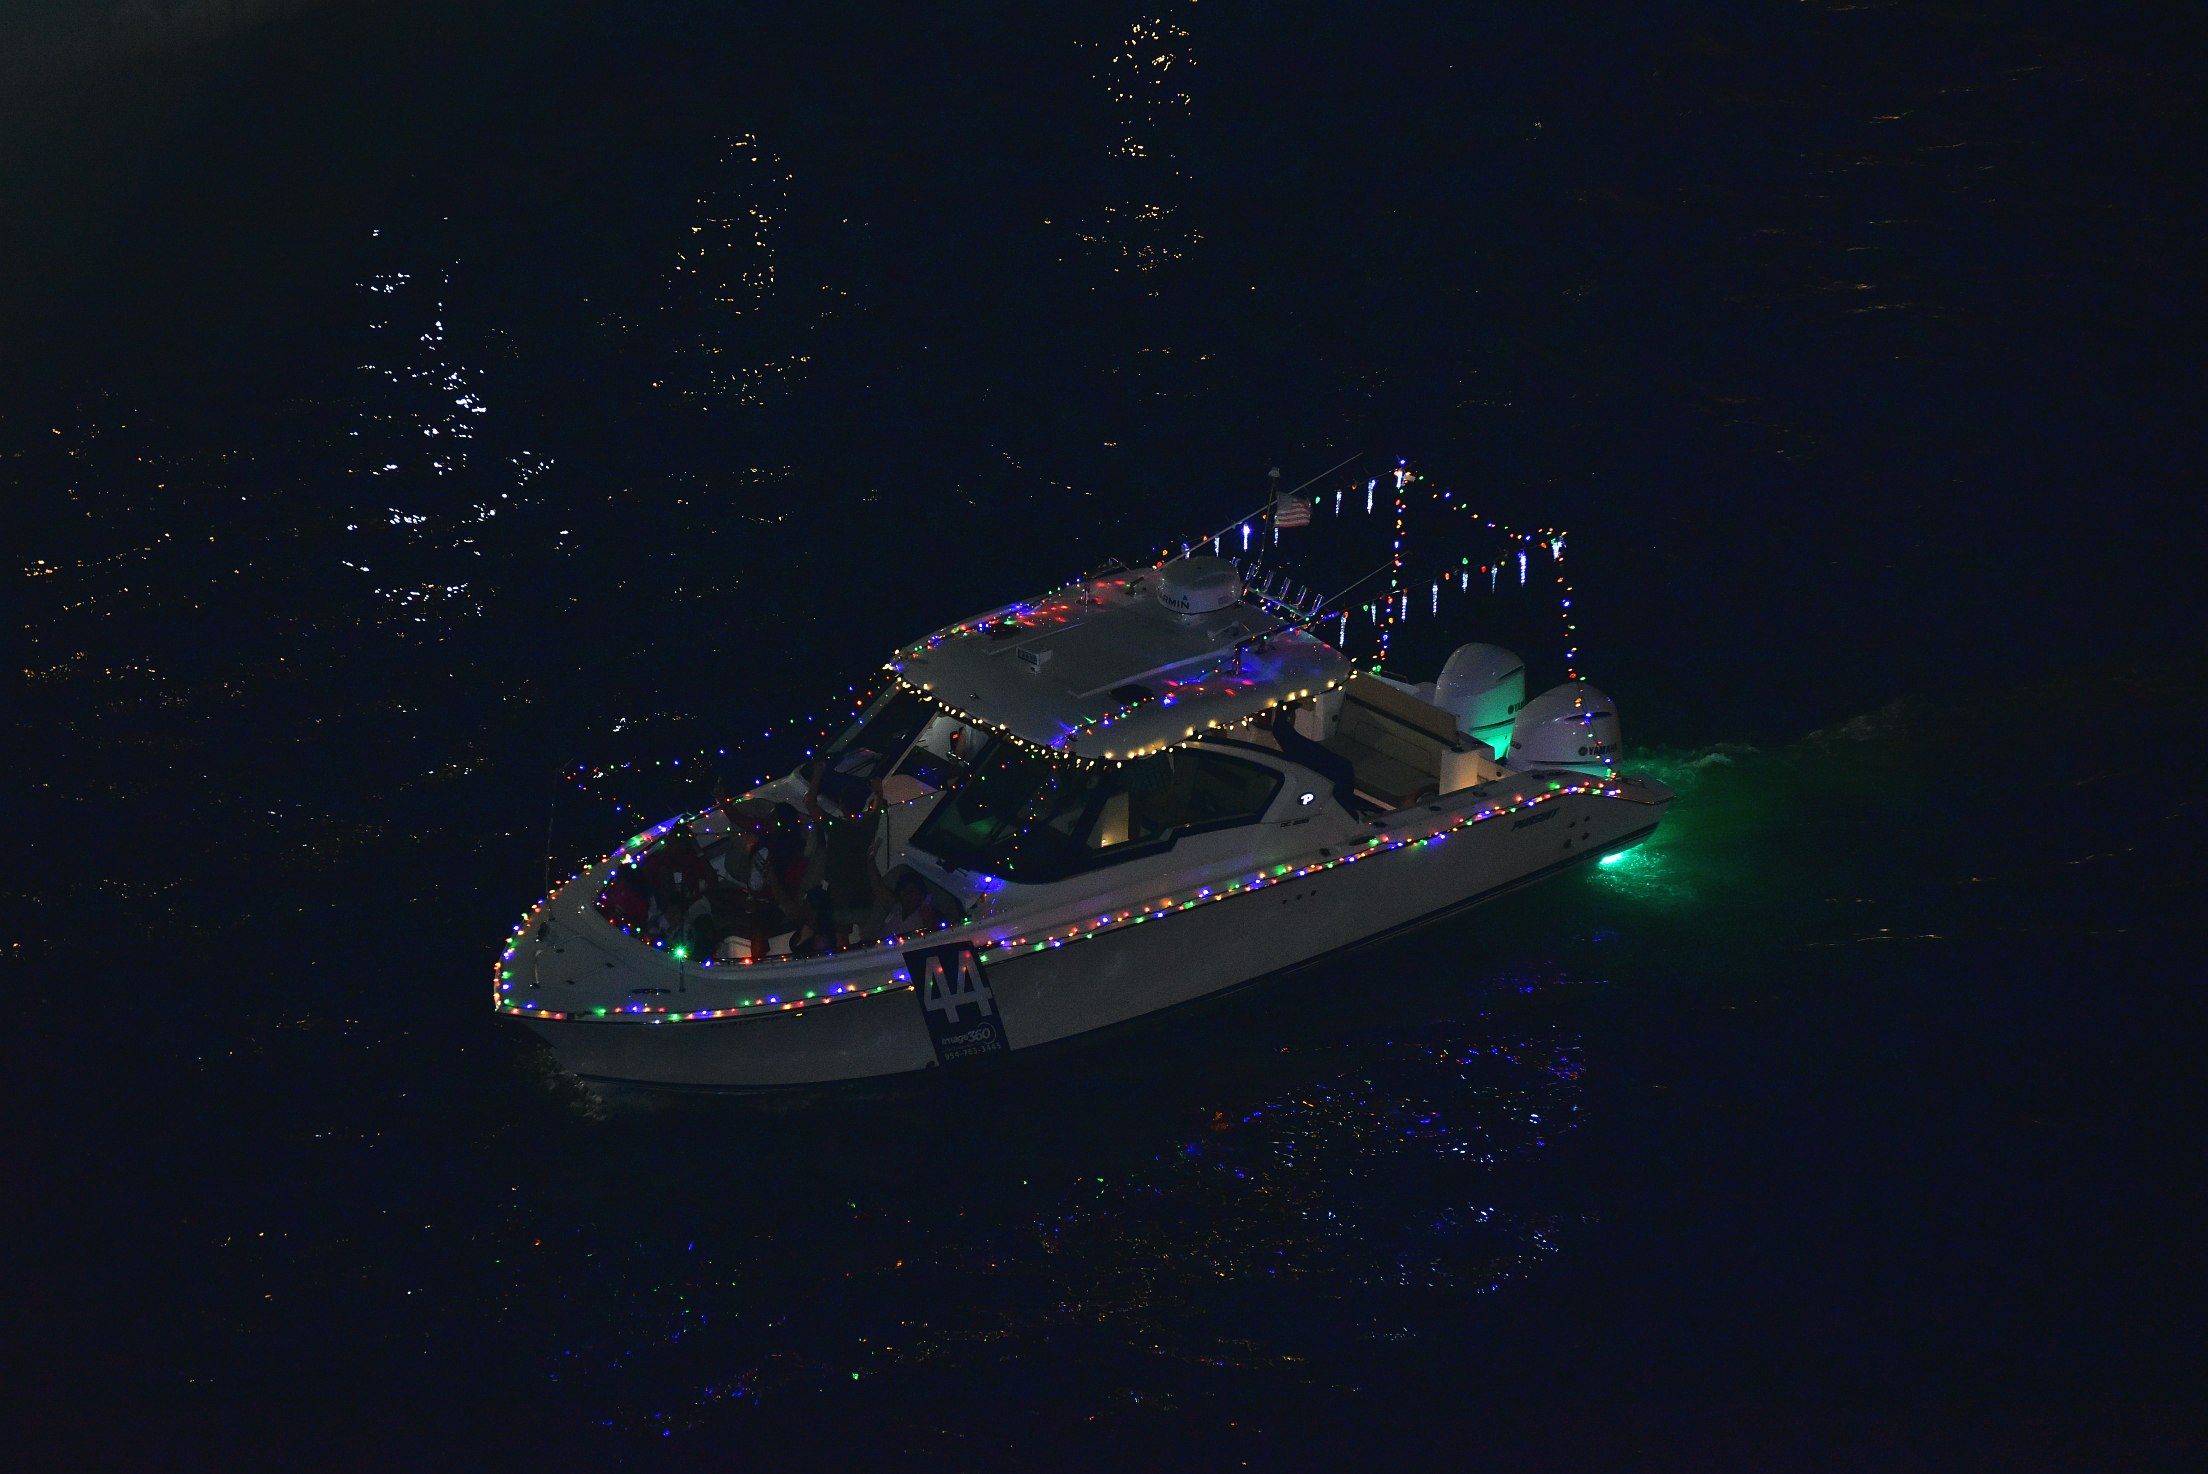 Sails Call, boat number 44 in the 2021 Winterfest Boat Parade